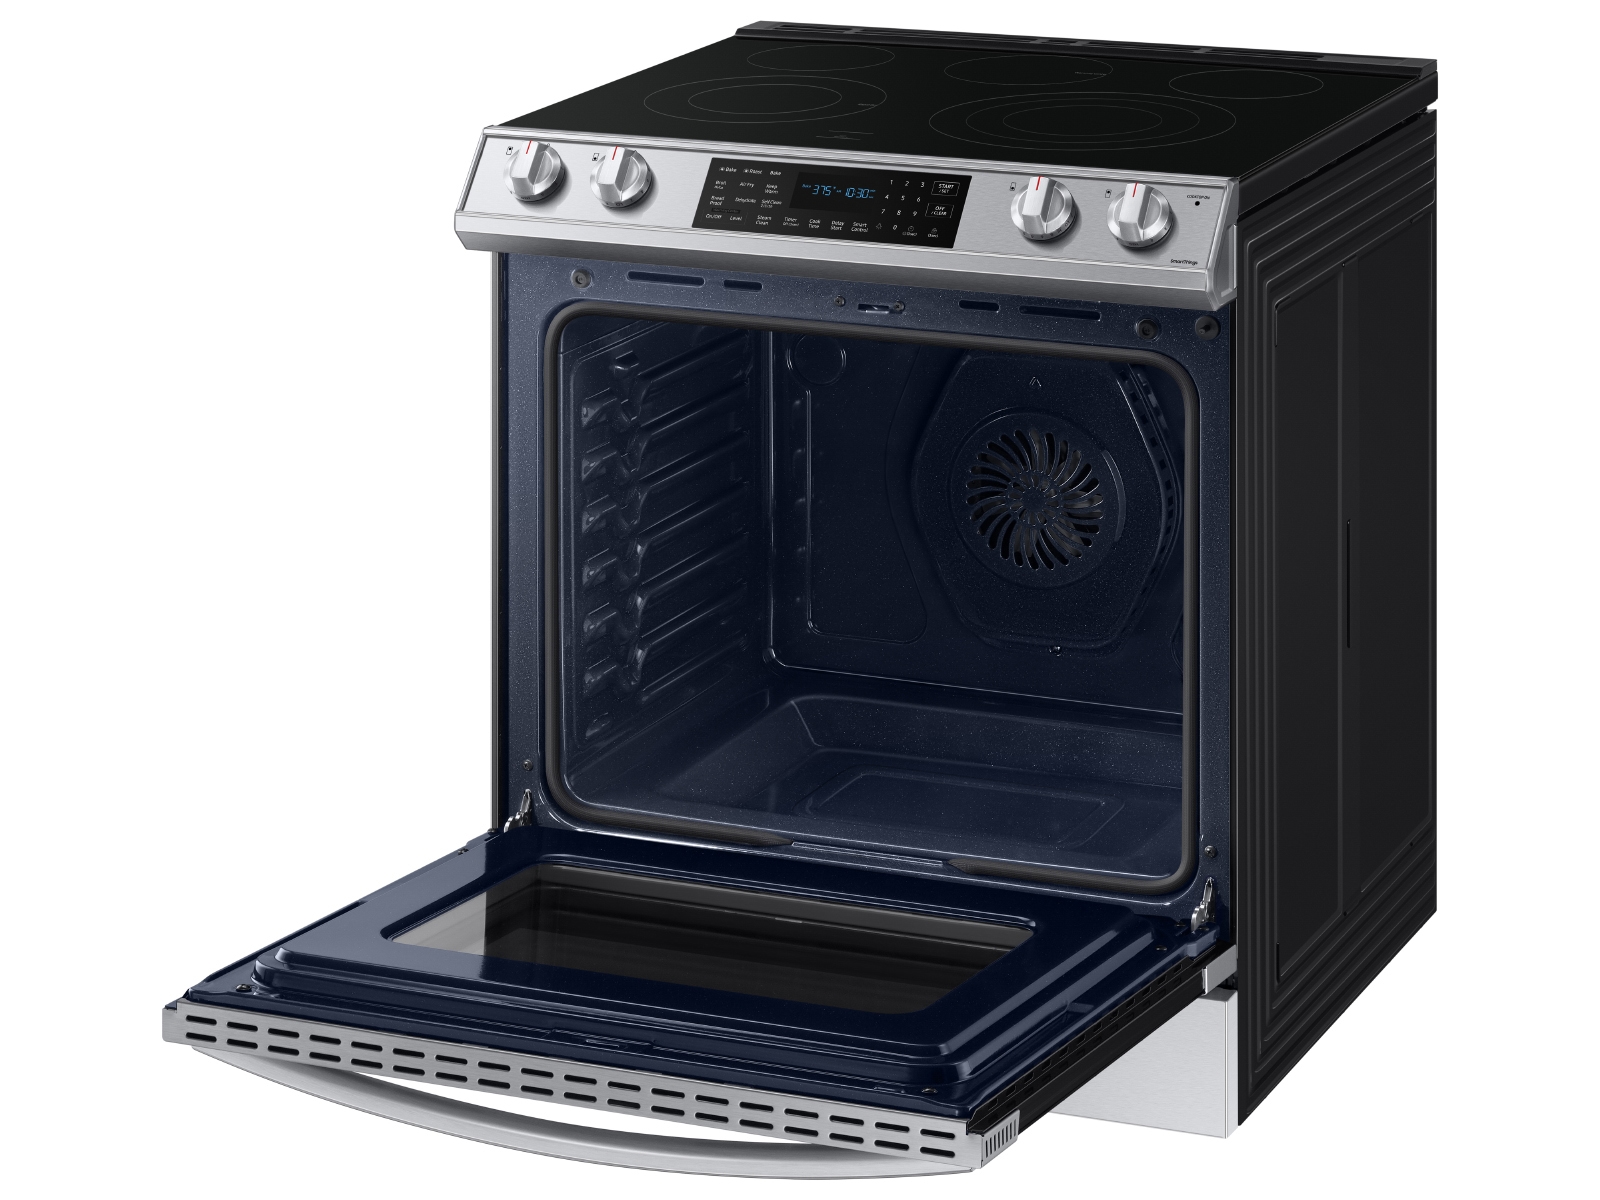 Decades-old appliance is apple of the cook's eye